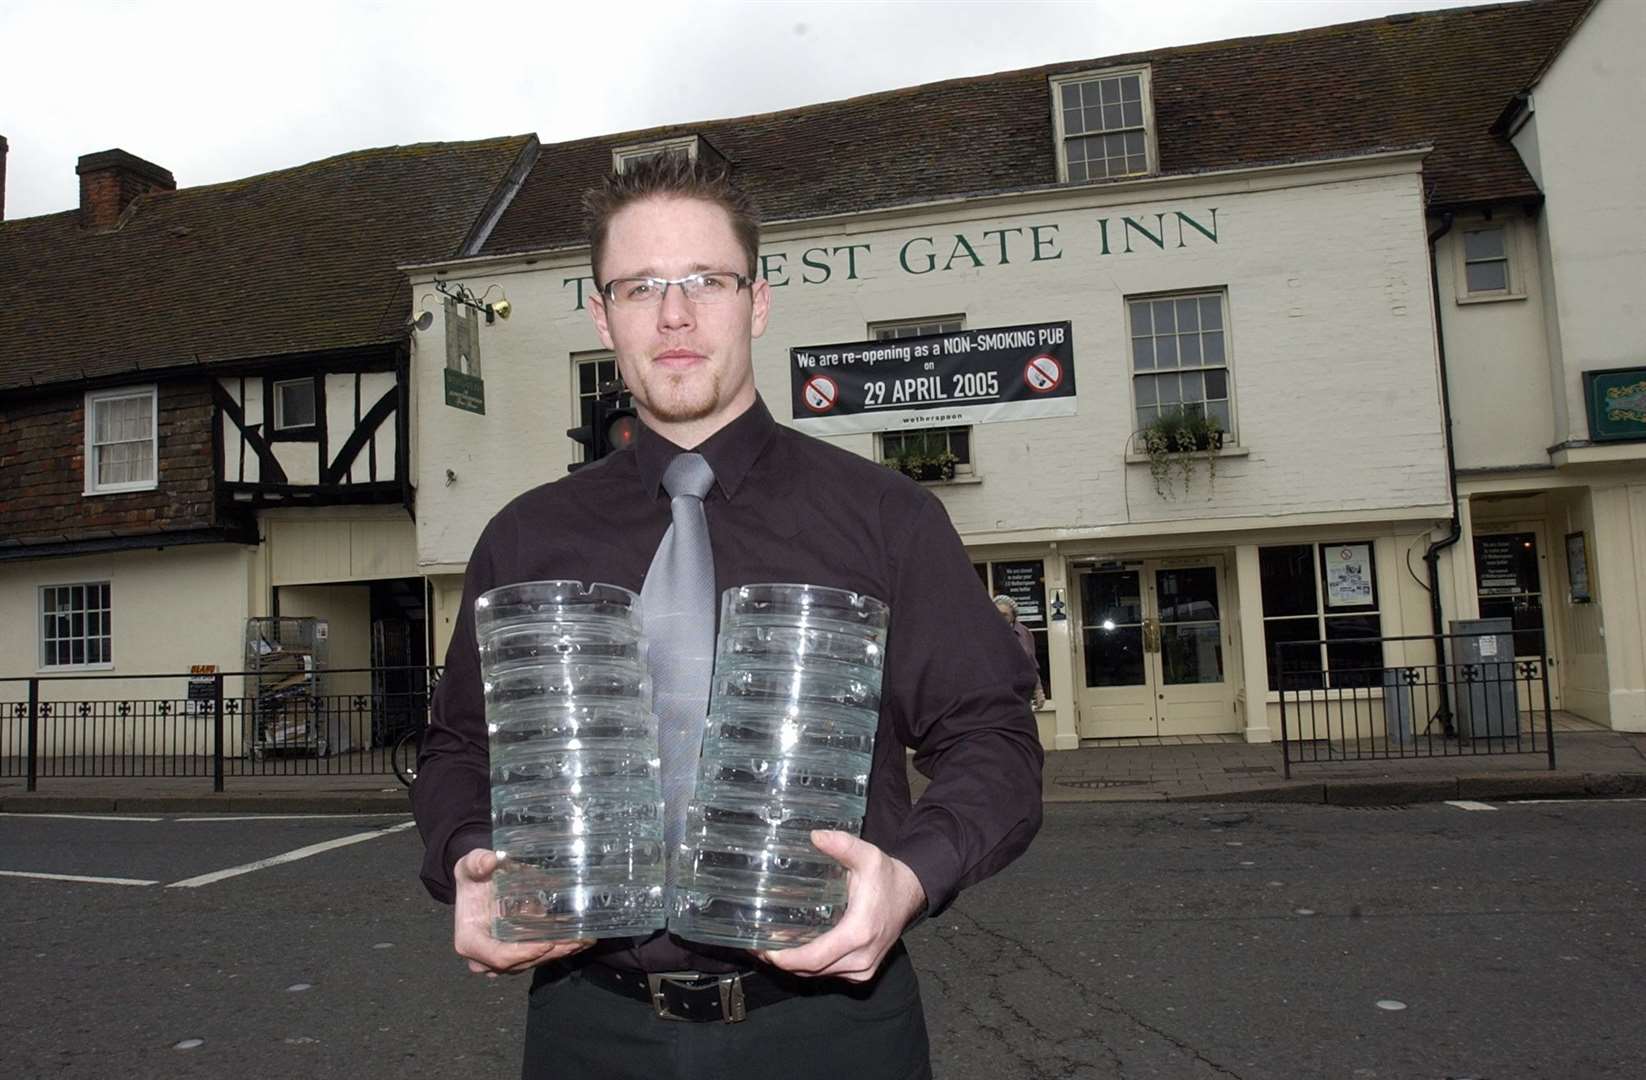 In 2005 the West Gate Inn became the first non-smoking pub in the city. Manager Ian Feltham is pictured with a pile of redundant ash trays destined for the bin.